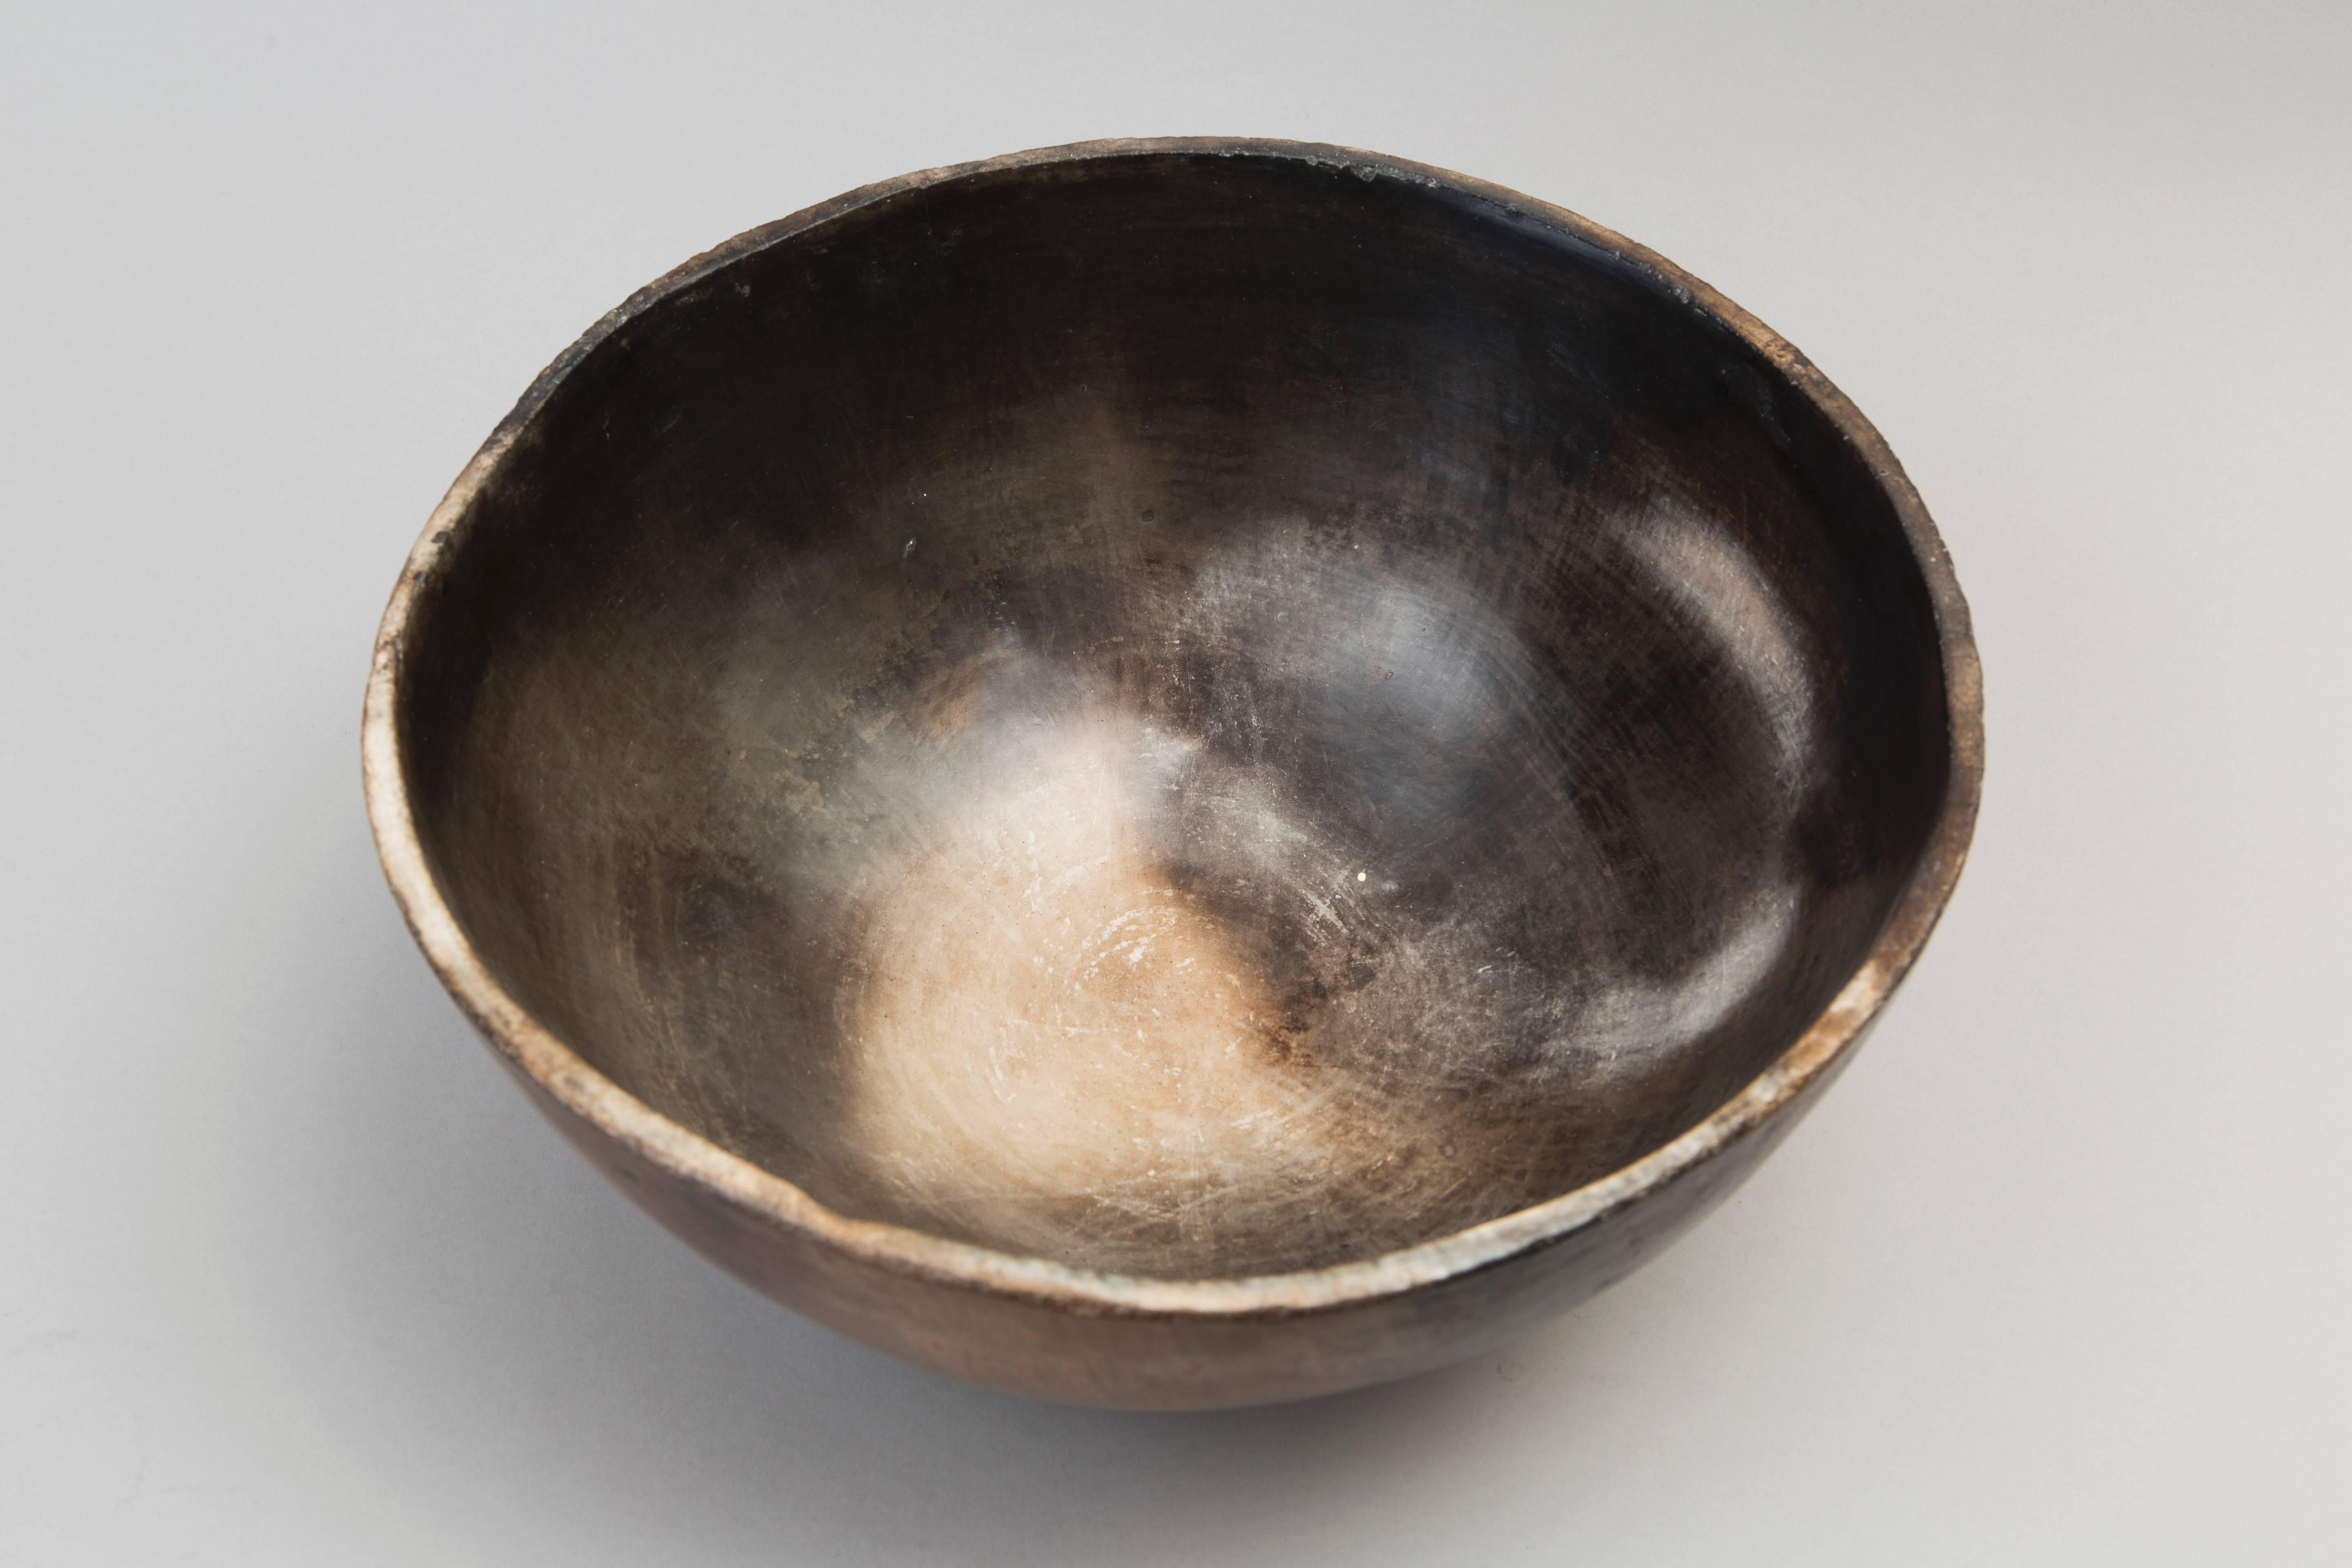 French Contemporary 2015 Smoke Fired Bowl, One of a Kind, Karen Swami